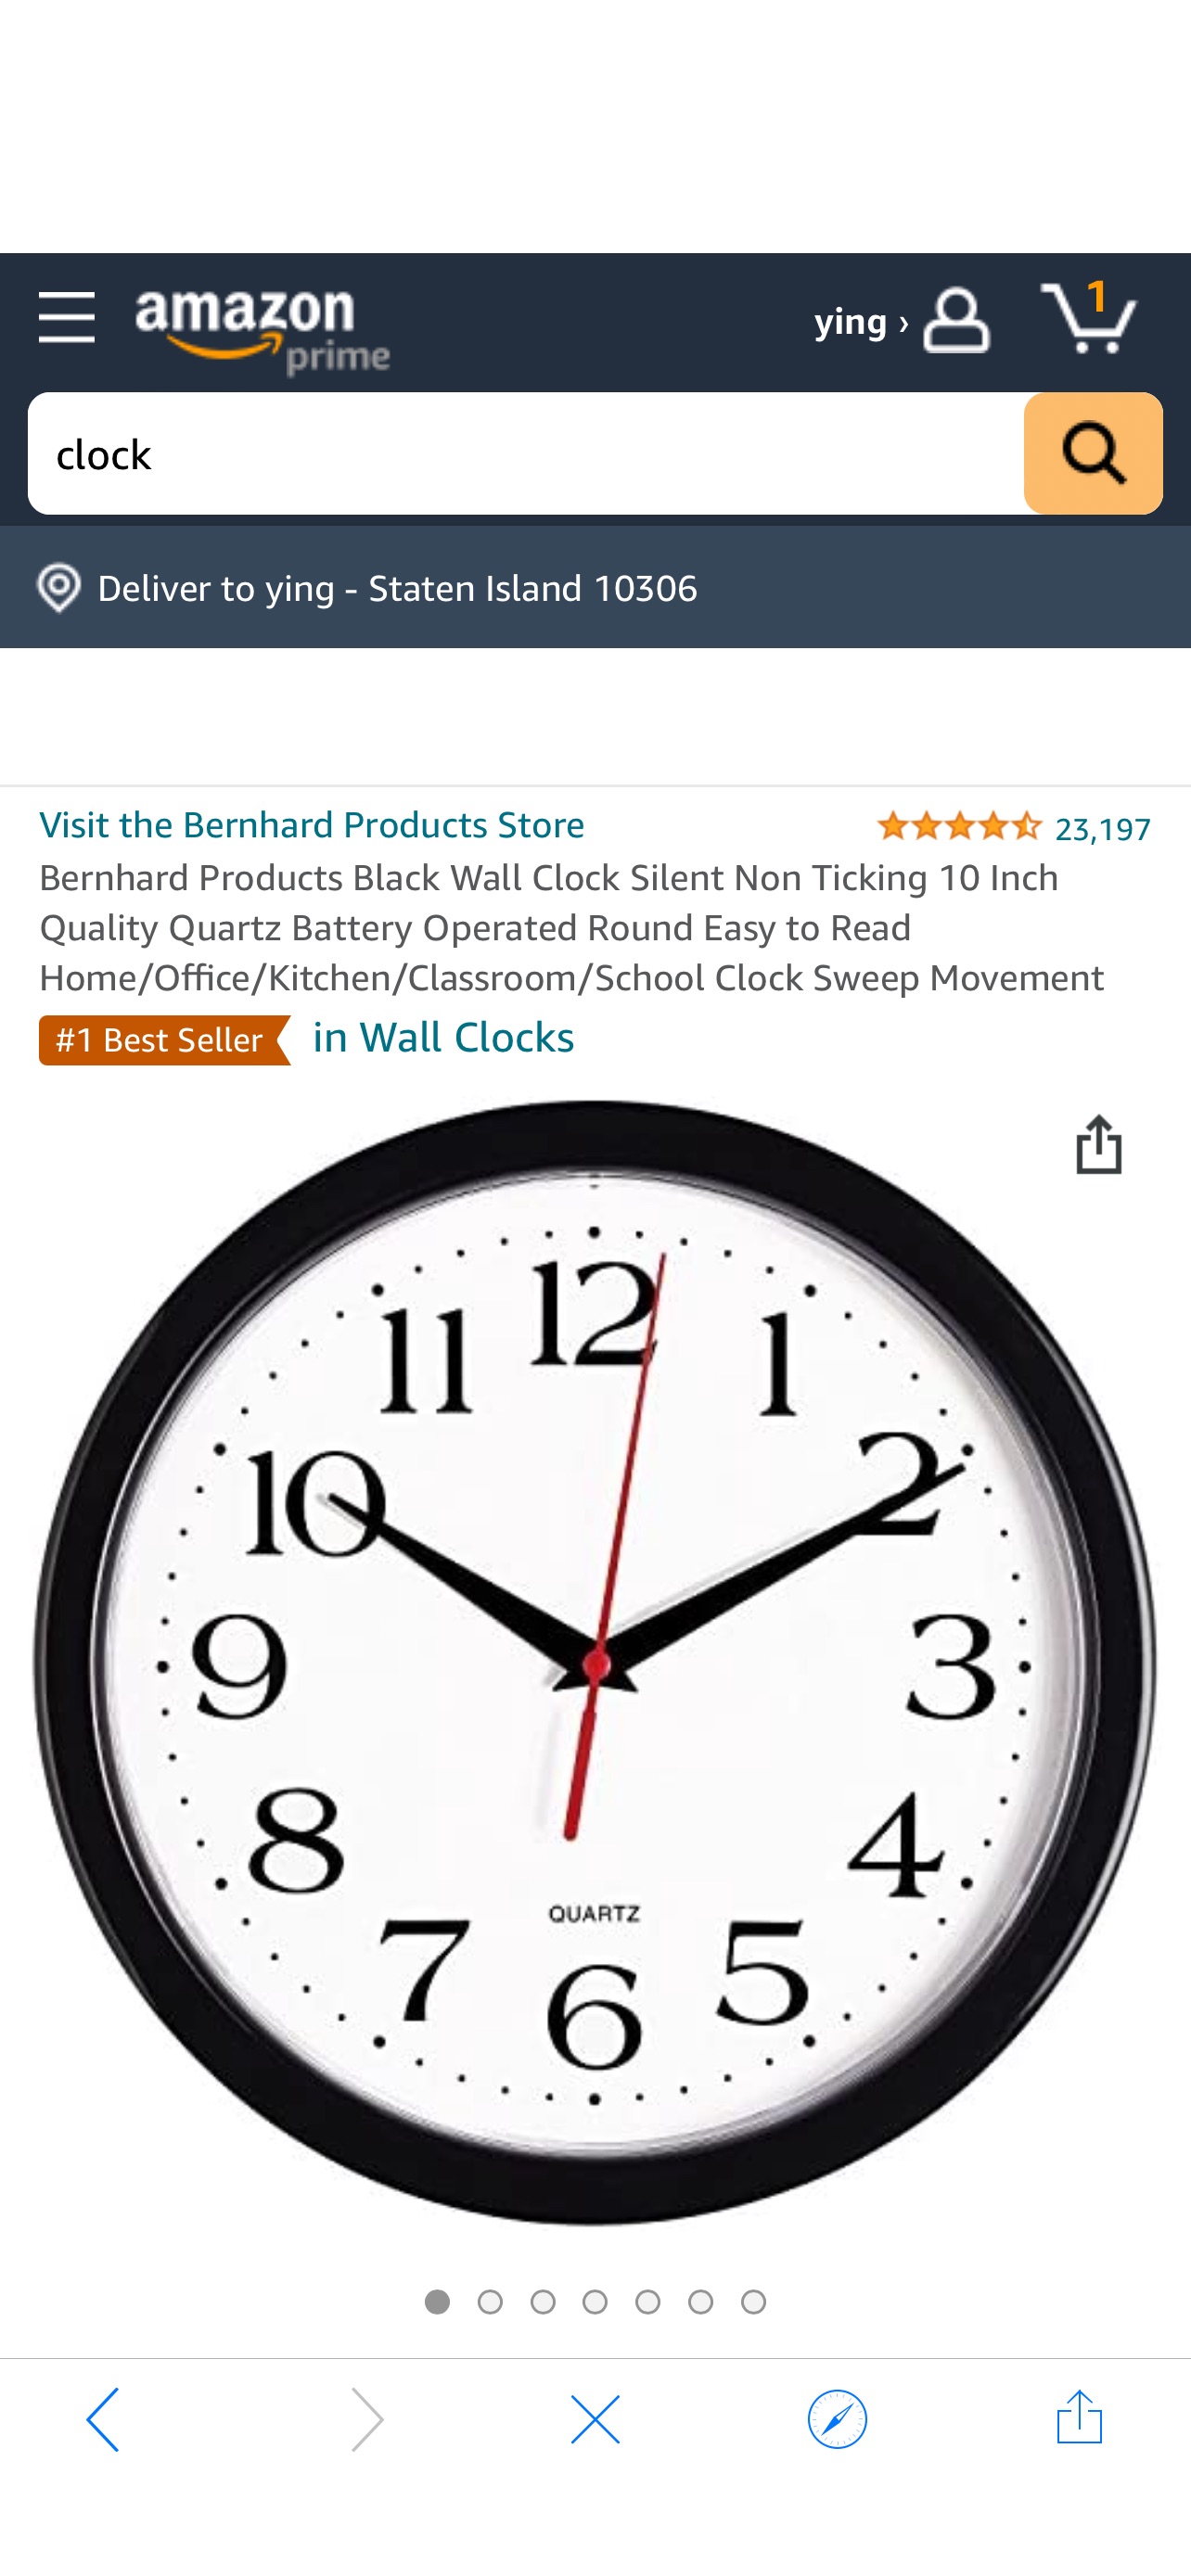 Amazon.com: Bernhard Products Black Wall Clock Silent Non Ticking 10 Inch Quality Quartz Battery Operated Round Easy to Read Home/Office/Kitchen/Classroom/School Clock Sweep Movement : Home & Kitchen